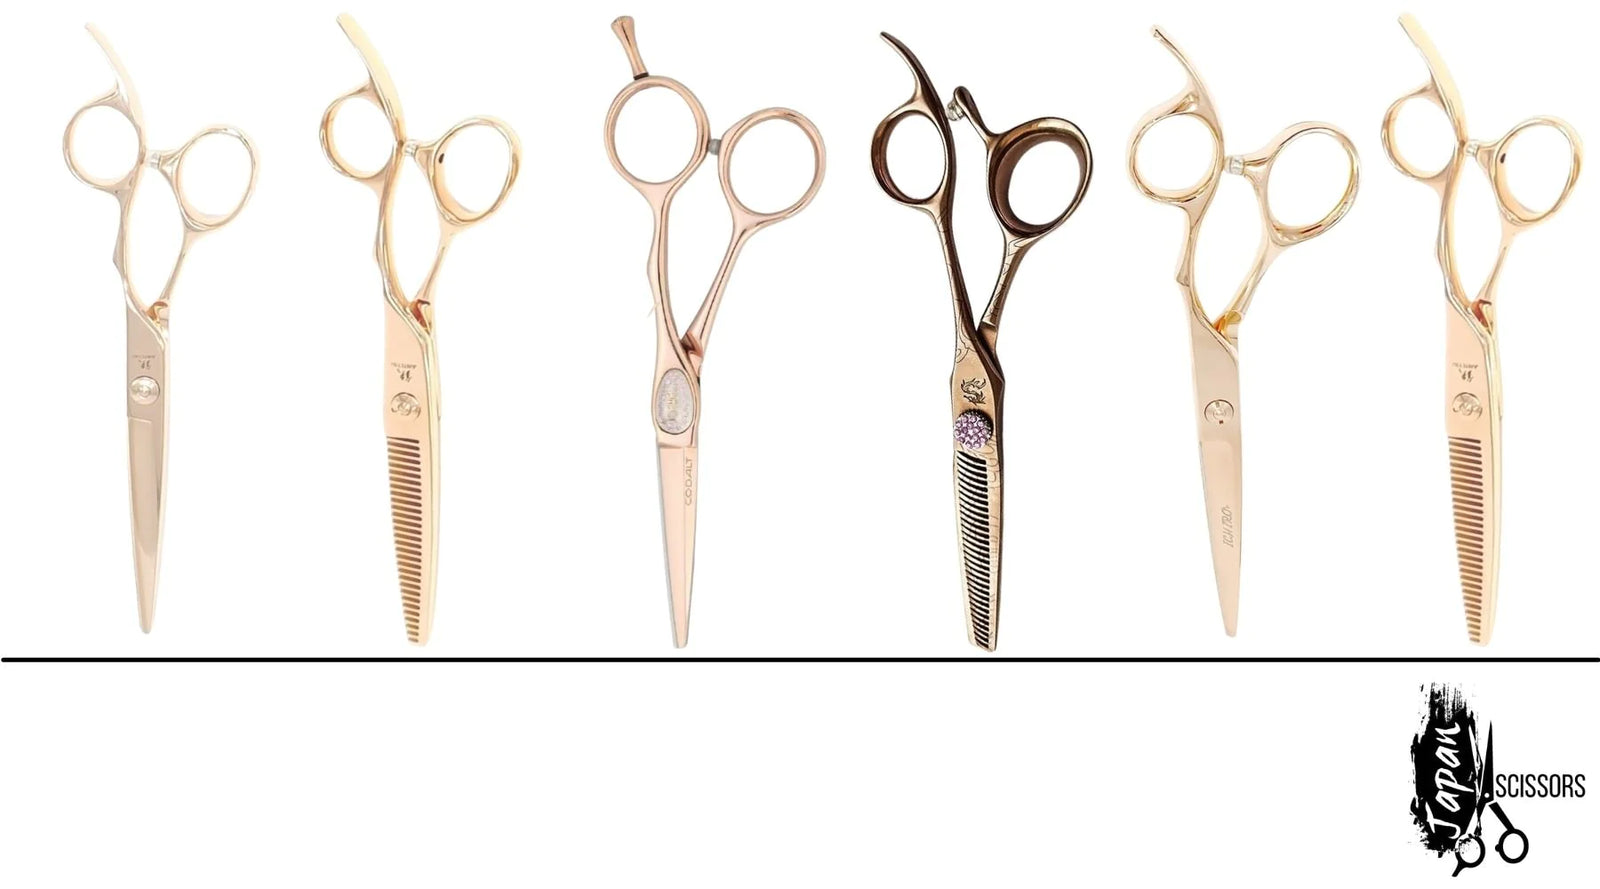 The Best Scissors For Home Haircutting: Canadian Guide - japanscissorshop